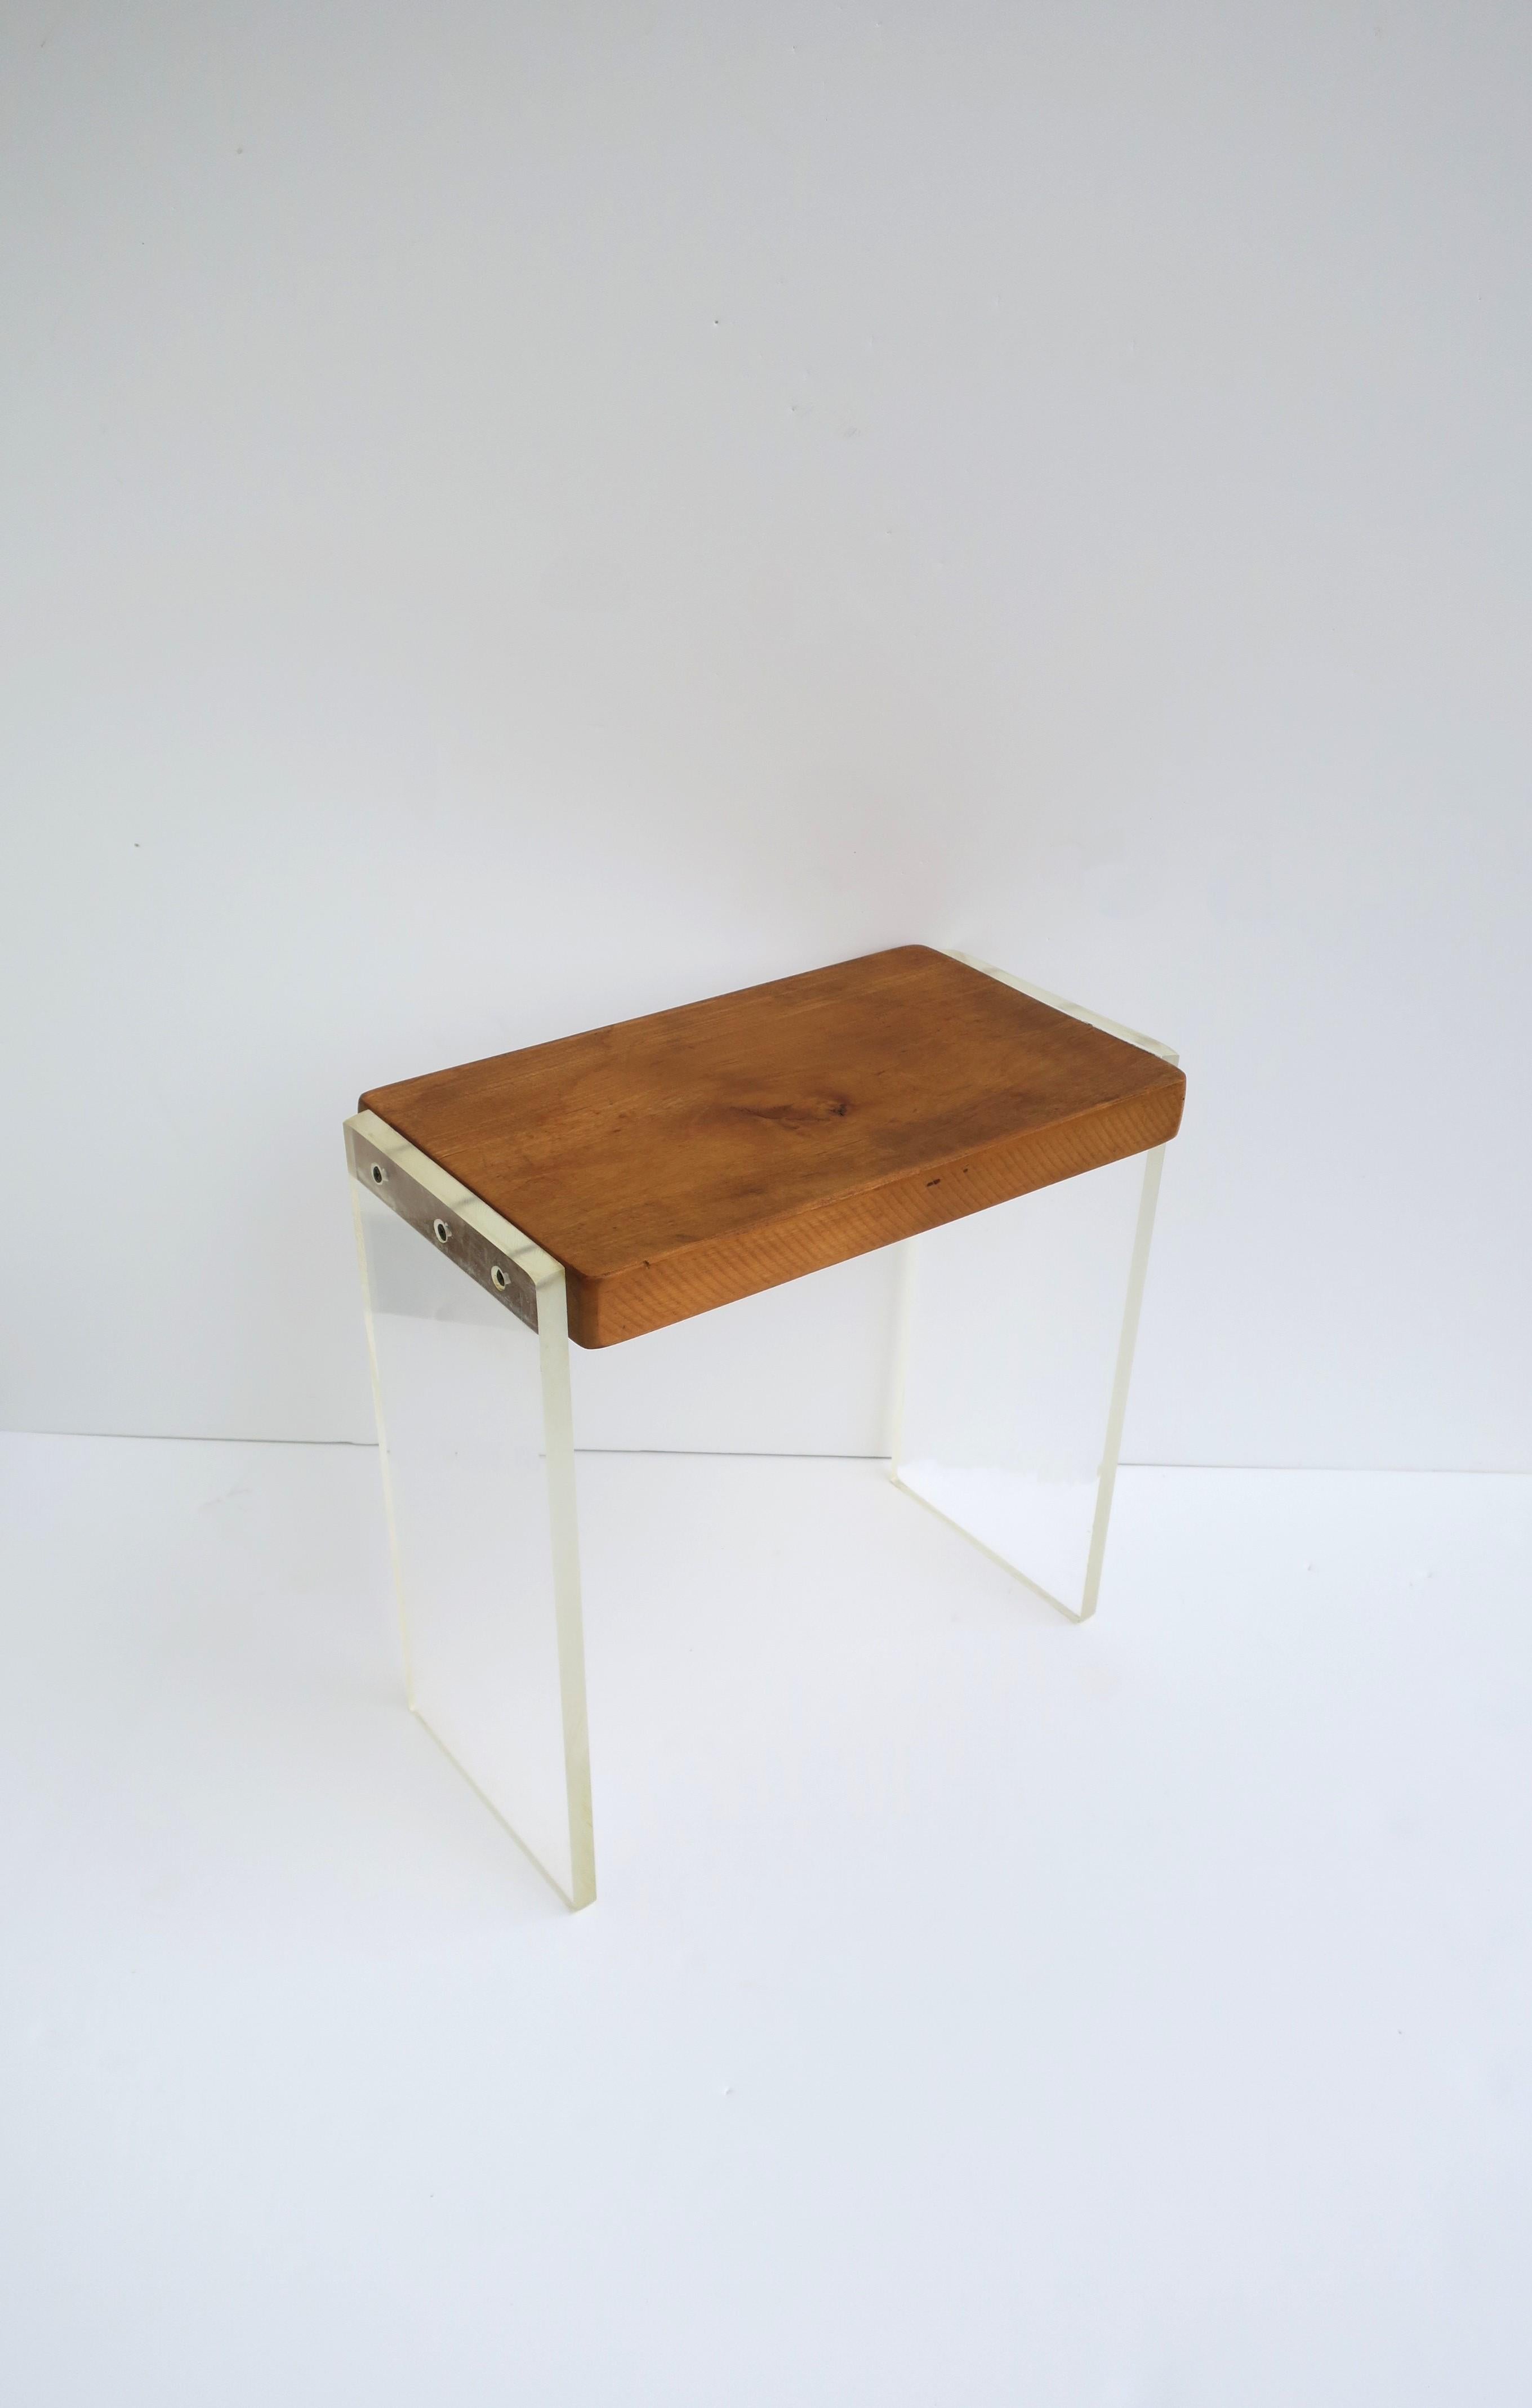 An oak and Lucite stool or small table, Post-modern design period, circa late-20th century. Piece is rectangular with Lucite legs and a thick oak top/seat. Oak is 1.25